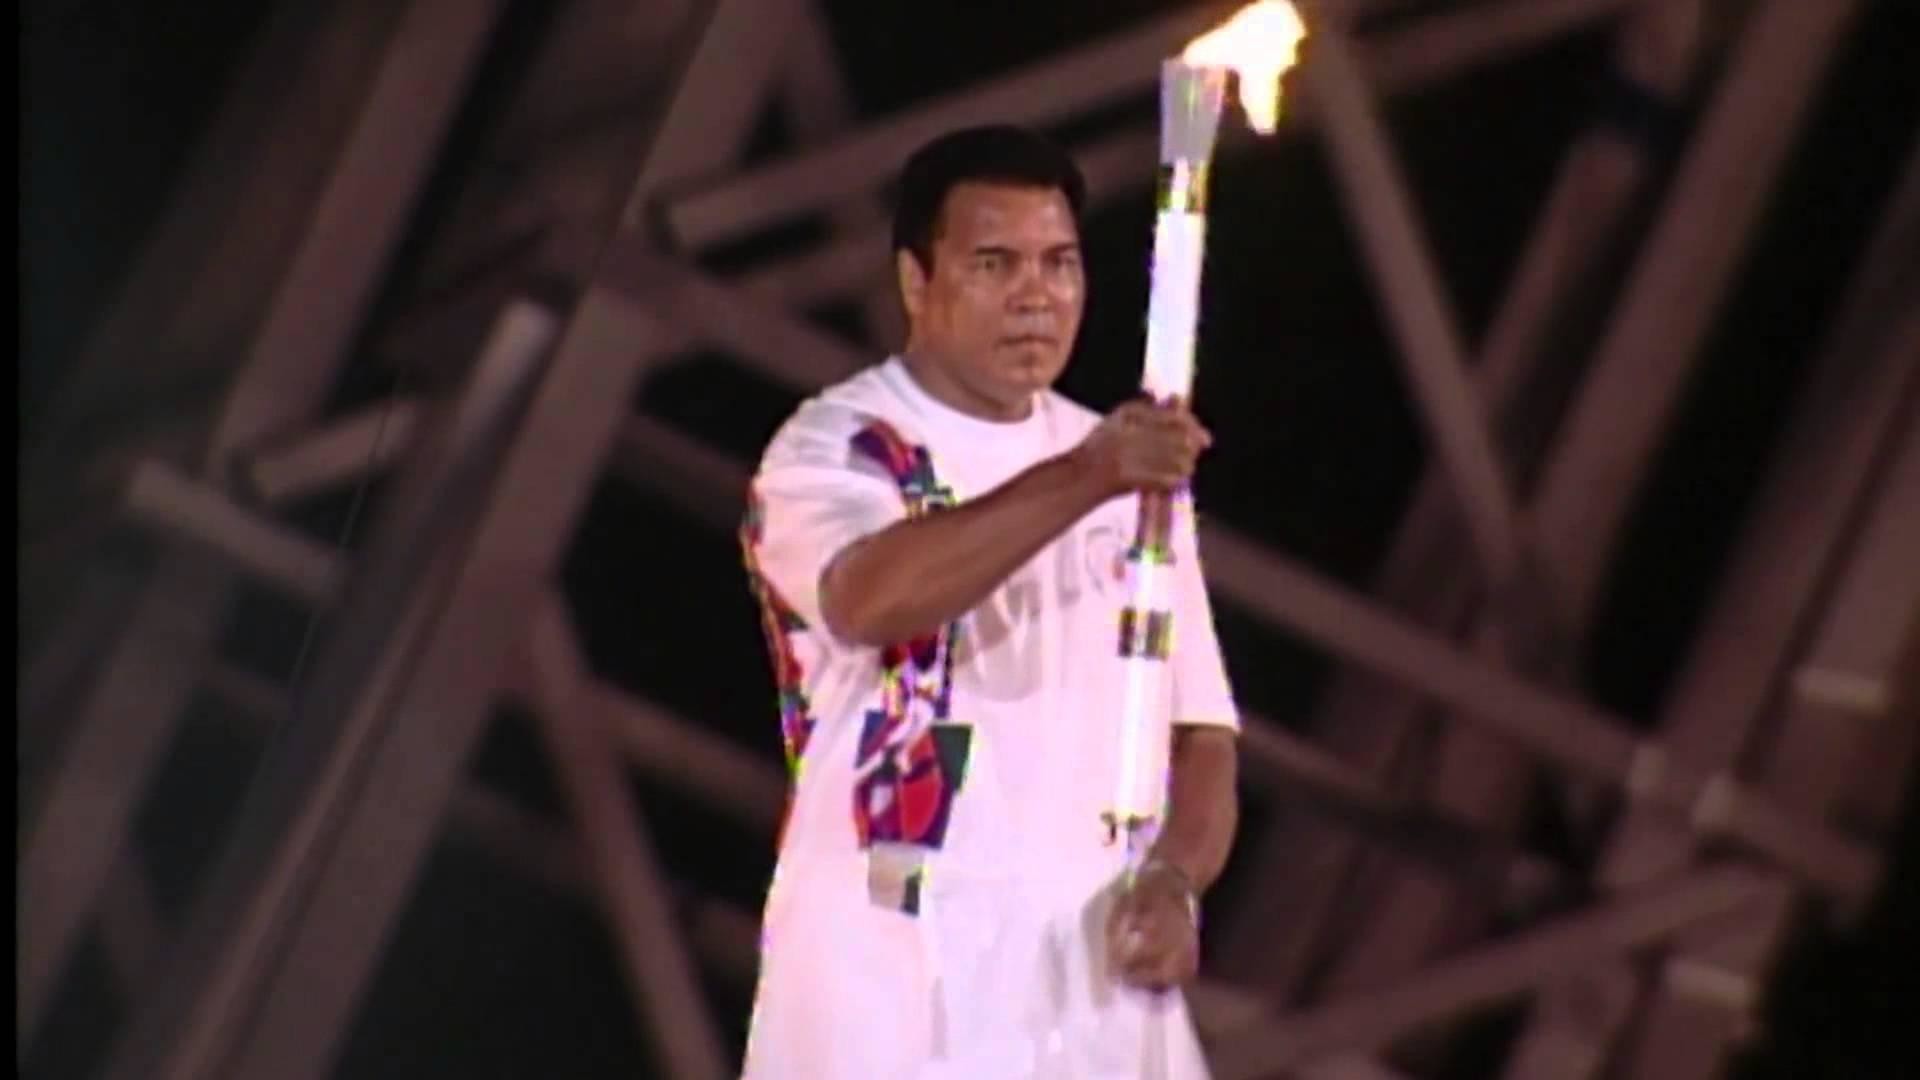 1920x1080 Muhammad Ali holding the Olympic torch during the 1996 games in Atlanta.